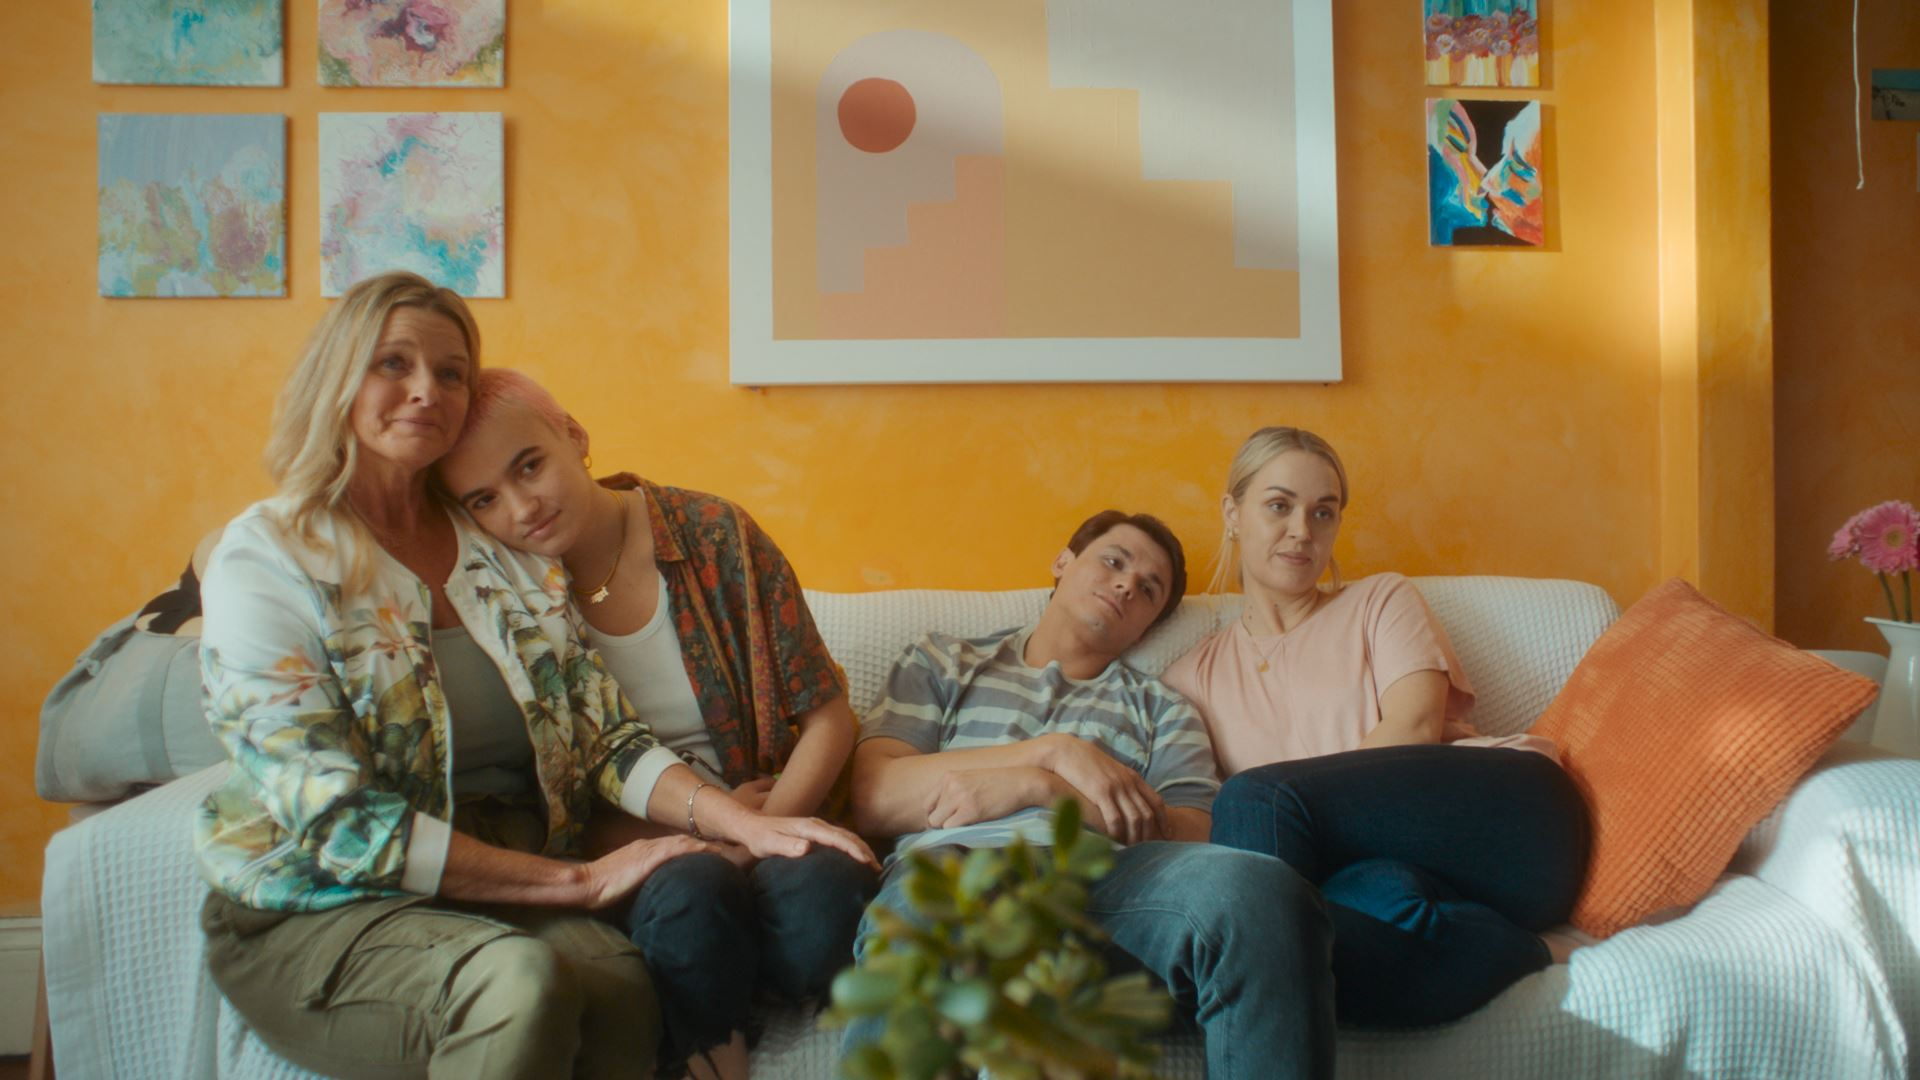 The Longest Weekend Director Molly Haddon Talks Queer Screen, Creating Genuine Family Connections on Screen, and More in This Interview